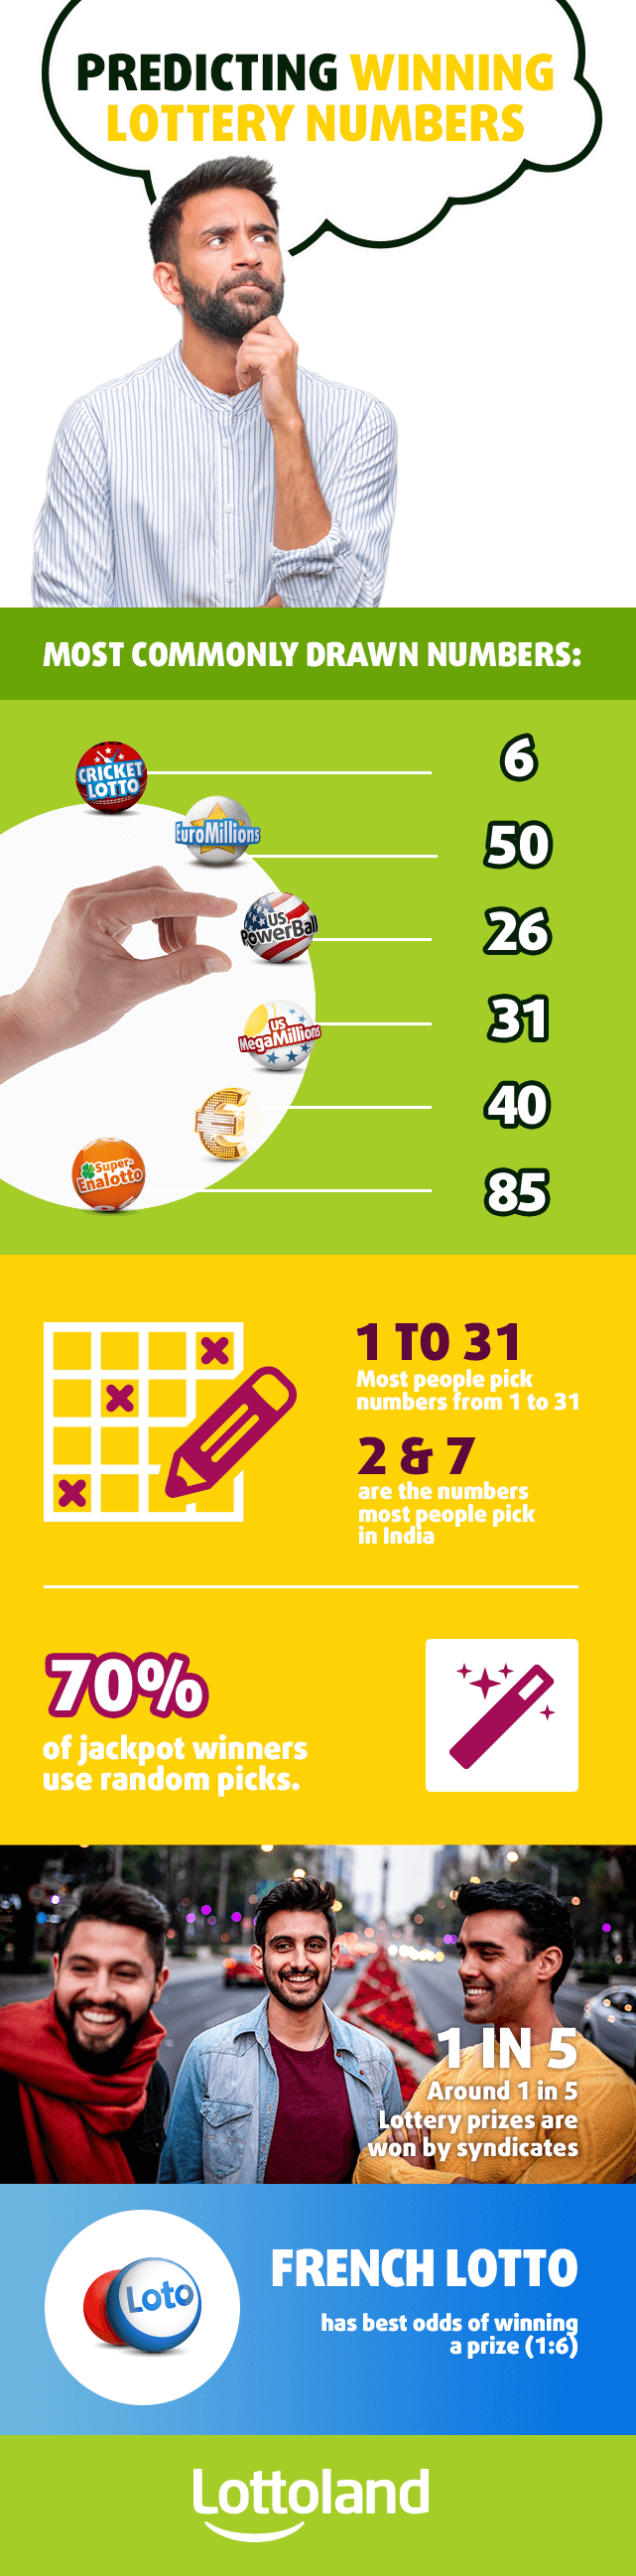 Infographic with most commonly drawn lottery numbers